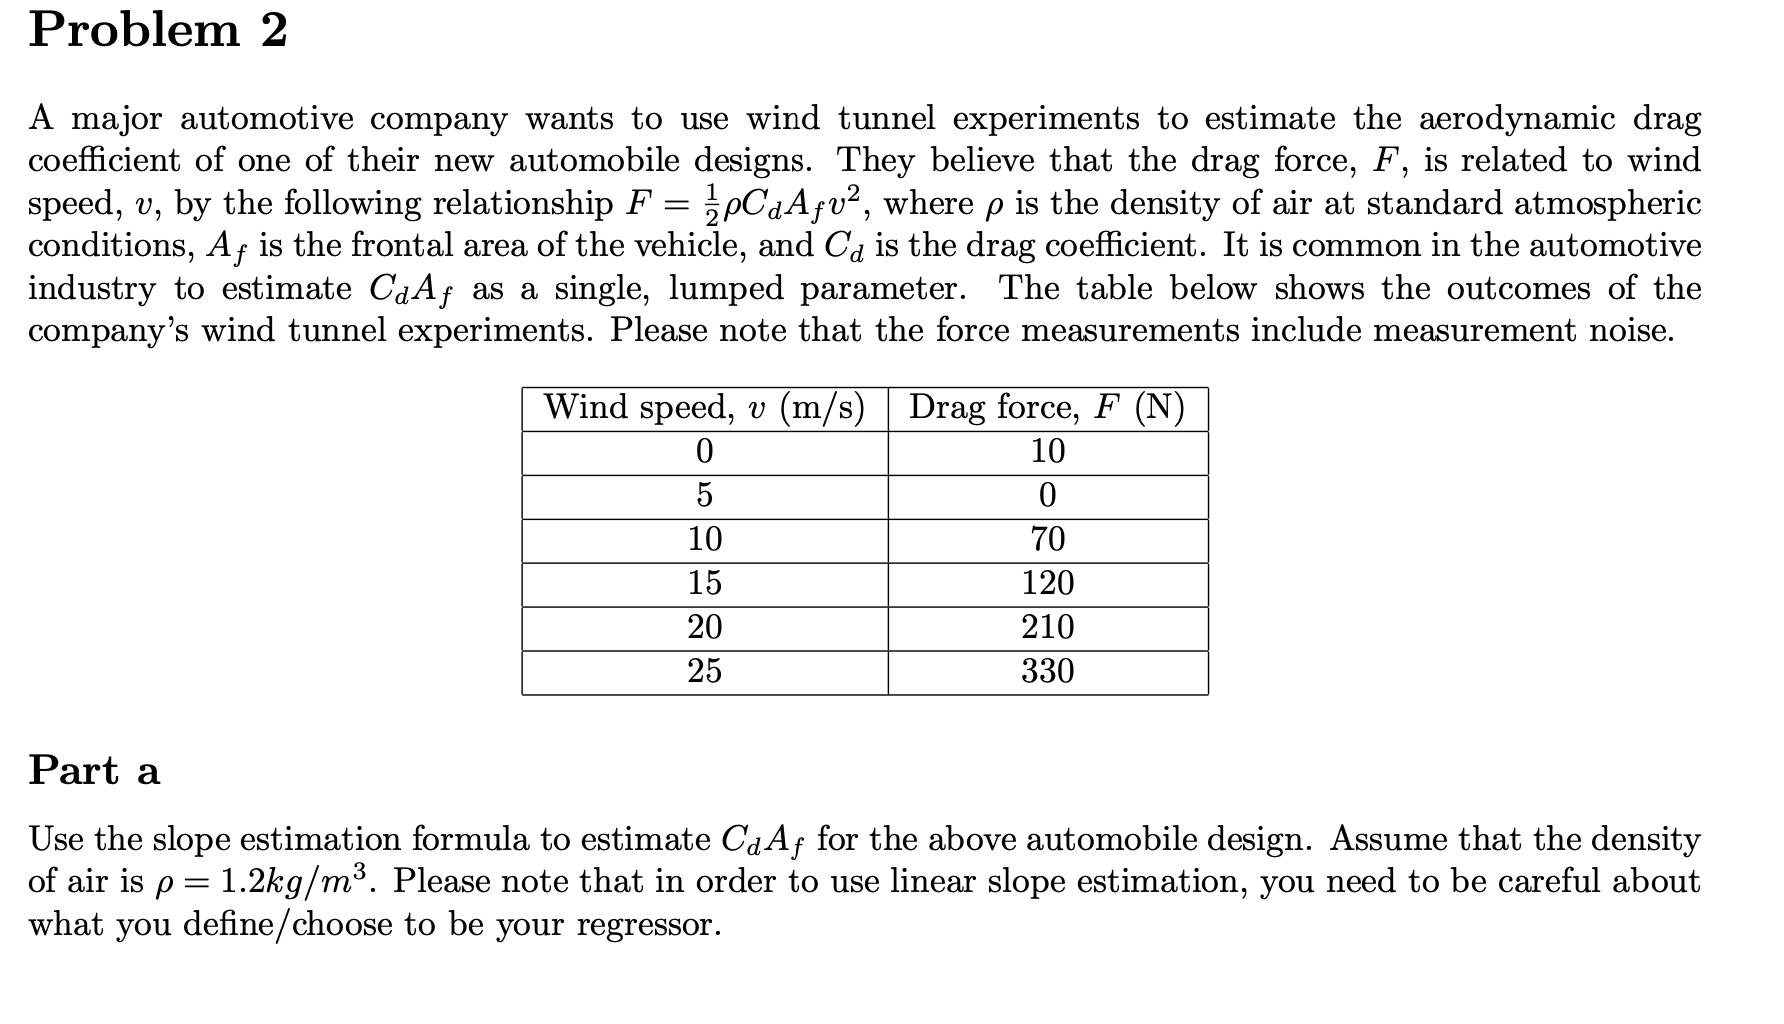 Problem 2
A major automotive company wants to use wind tunnel experiments to estimate the aerodynamic drag
coefficient of one of their new automobile designs. They believe that the drag force, F, is related to wind
speed, v, by the following relationship F = pCaAƒv², where p is the density of air at standard atmospheric
conditions, Af is the frontal area of the vehicle, and Ca is the drag coefficient. It is common in the automotive
industry to estimate CaAf as a single, lumped parameter. The table below shows the outcomes of the
company's wind tunnel experiments. Please note that the force measurements include measurement noise.
Wind speed, v (m/s) | Drag force, F (N)
10
5
10
70
15
120
20
210
25
330
Part a
Use the slope estimation formula to estimate CaAf for the above automobile design. Assume that the density
of air is p = 1.2kg/m³. Please note that in order to use linear slope estimation, you need to be careful about
what you define/choose to be your regressor.
